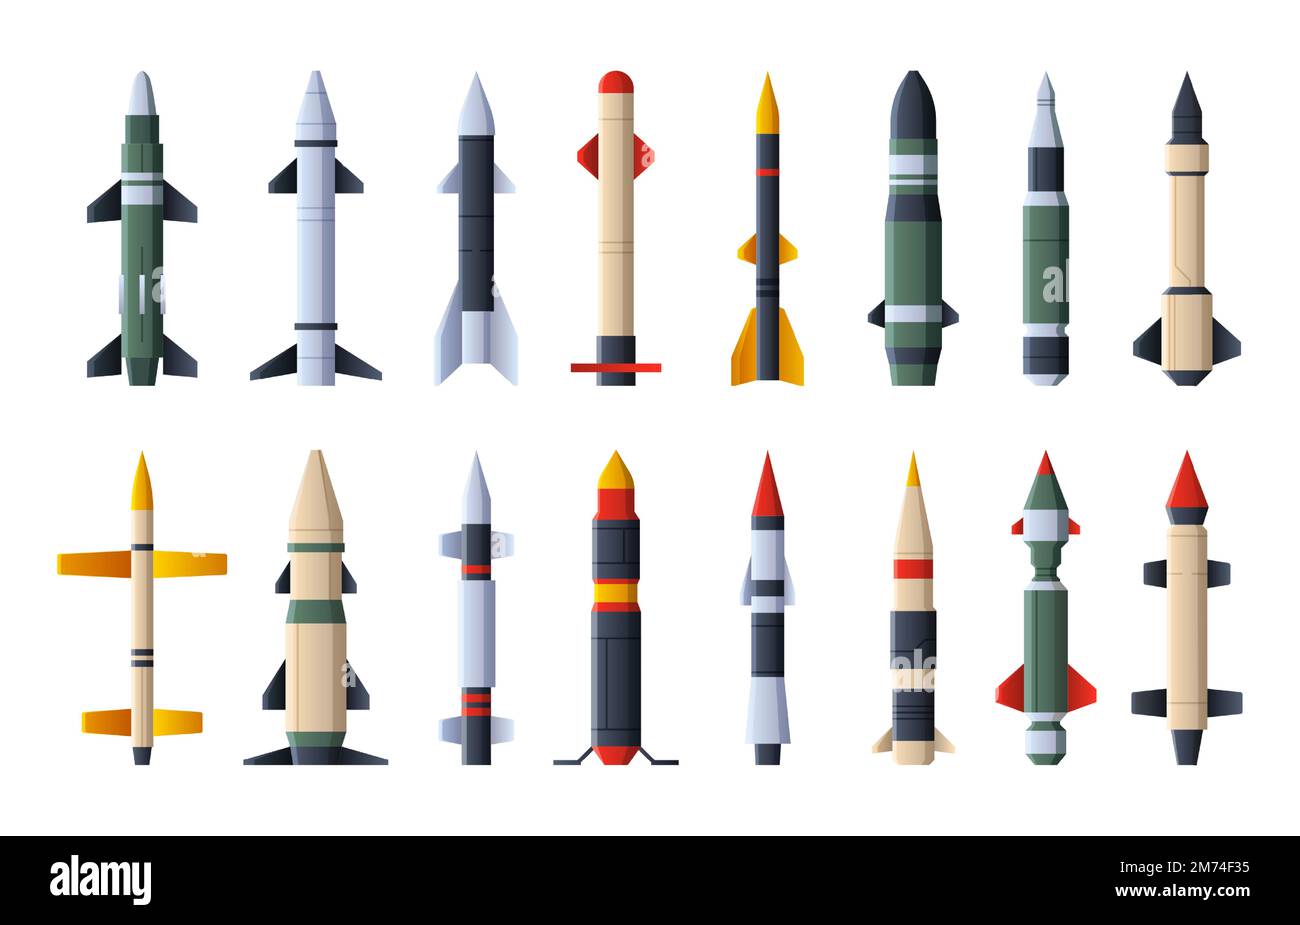 Missiles collection. Military aircraft weapon warhead, explosive missilery ballistic rocket and artillery projectile, wartime army equipment. Vector f Stock Vector